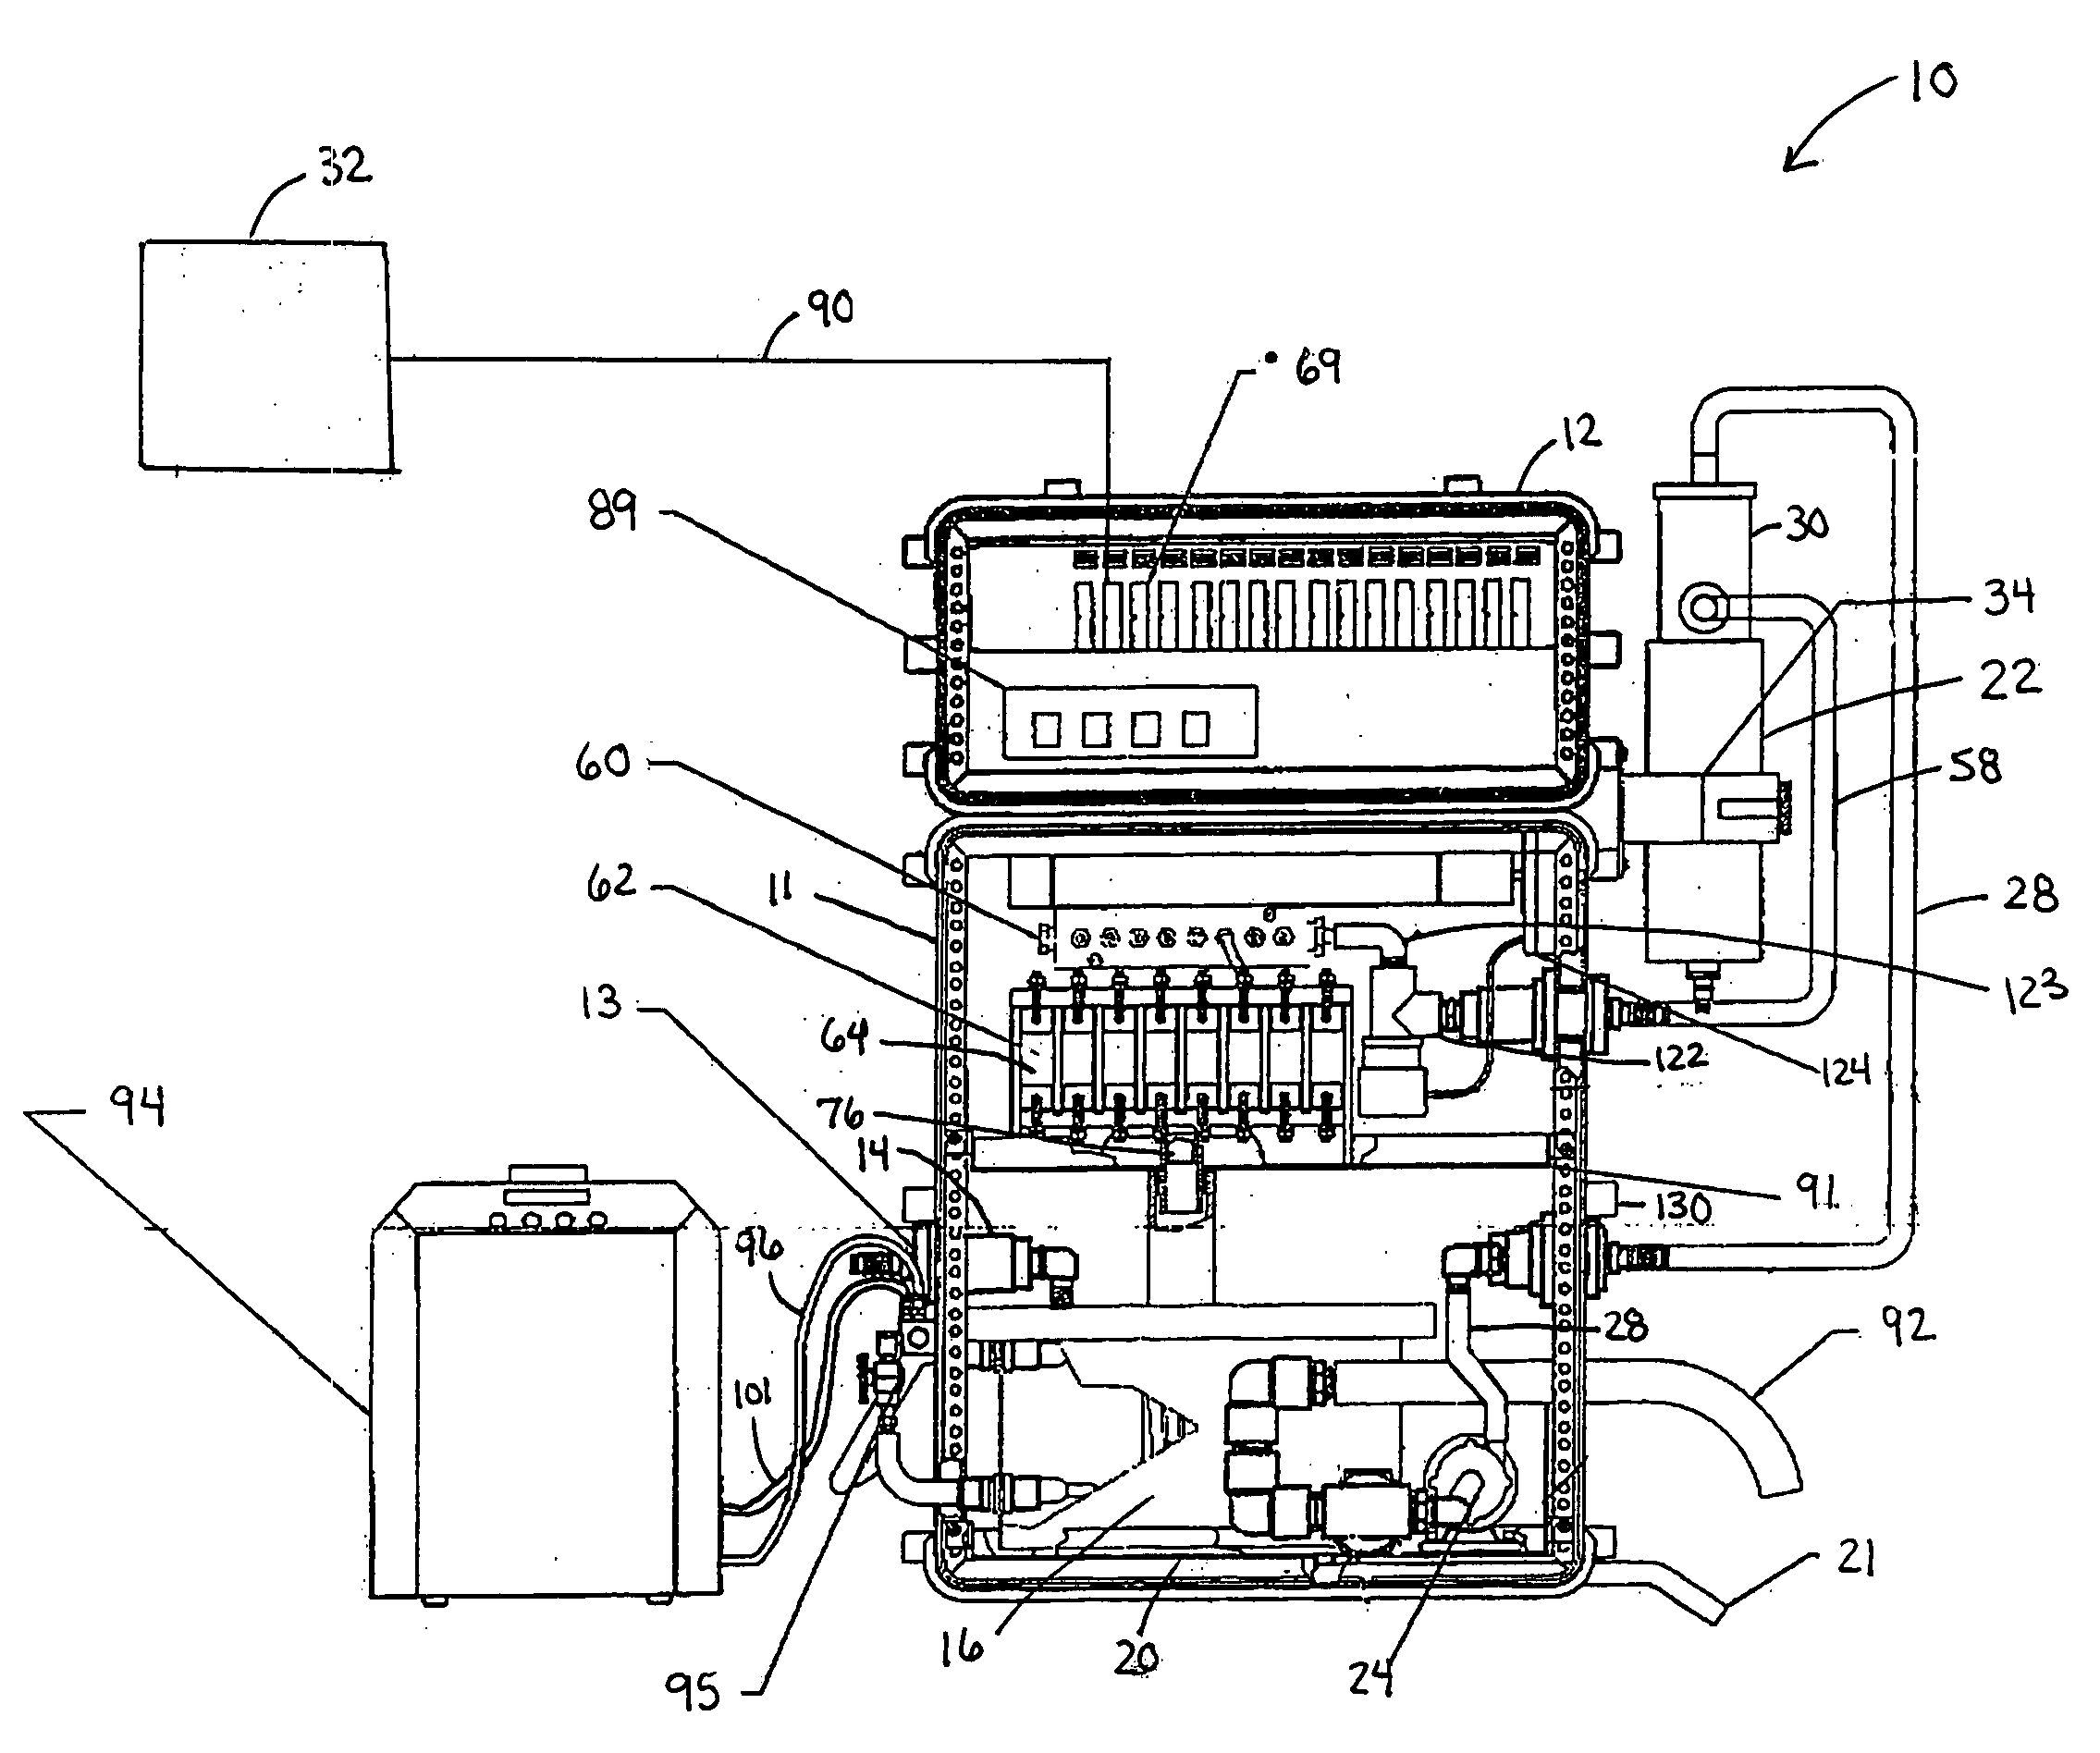 Apparatus and method of portable automated biomonitoring of water quality